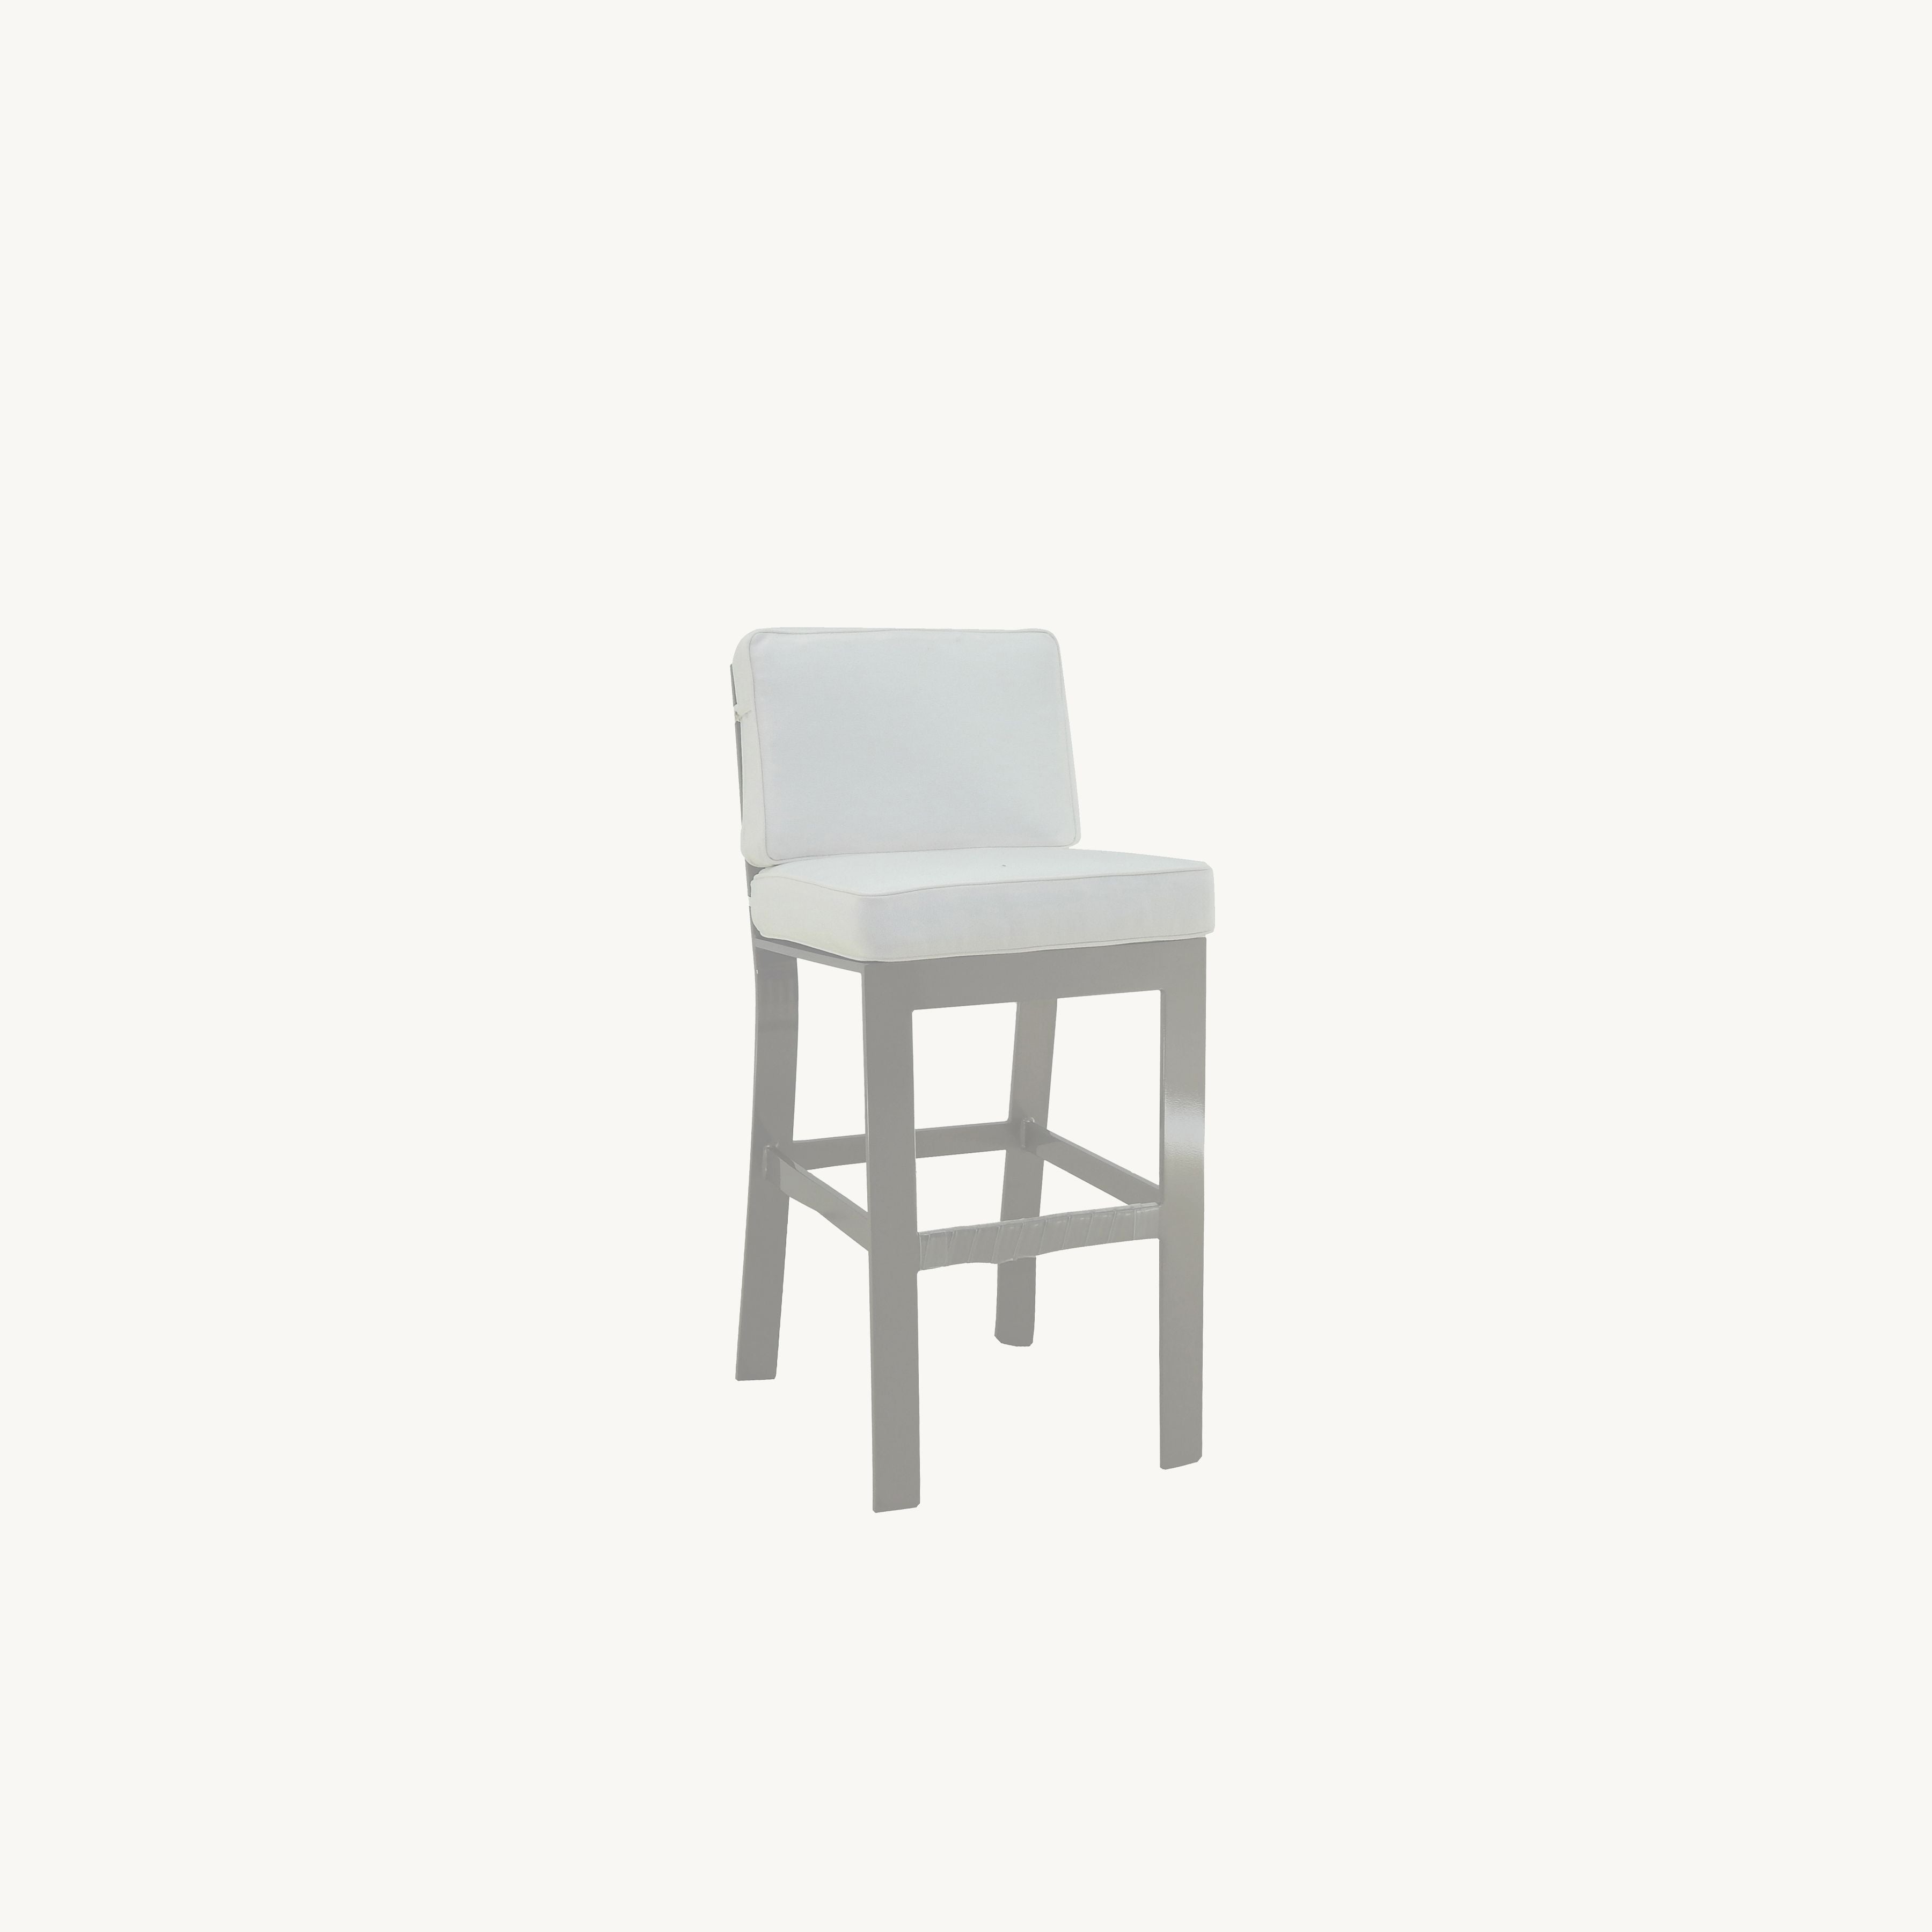 Trento Cushioned Ultra High Bar Stool By Castelle